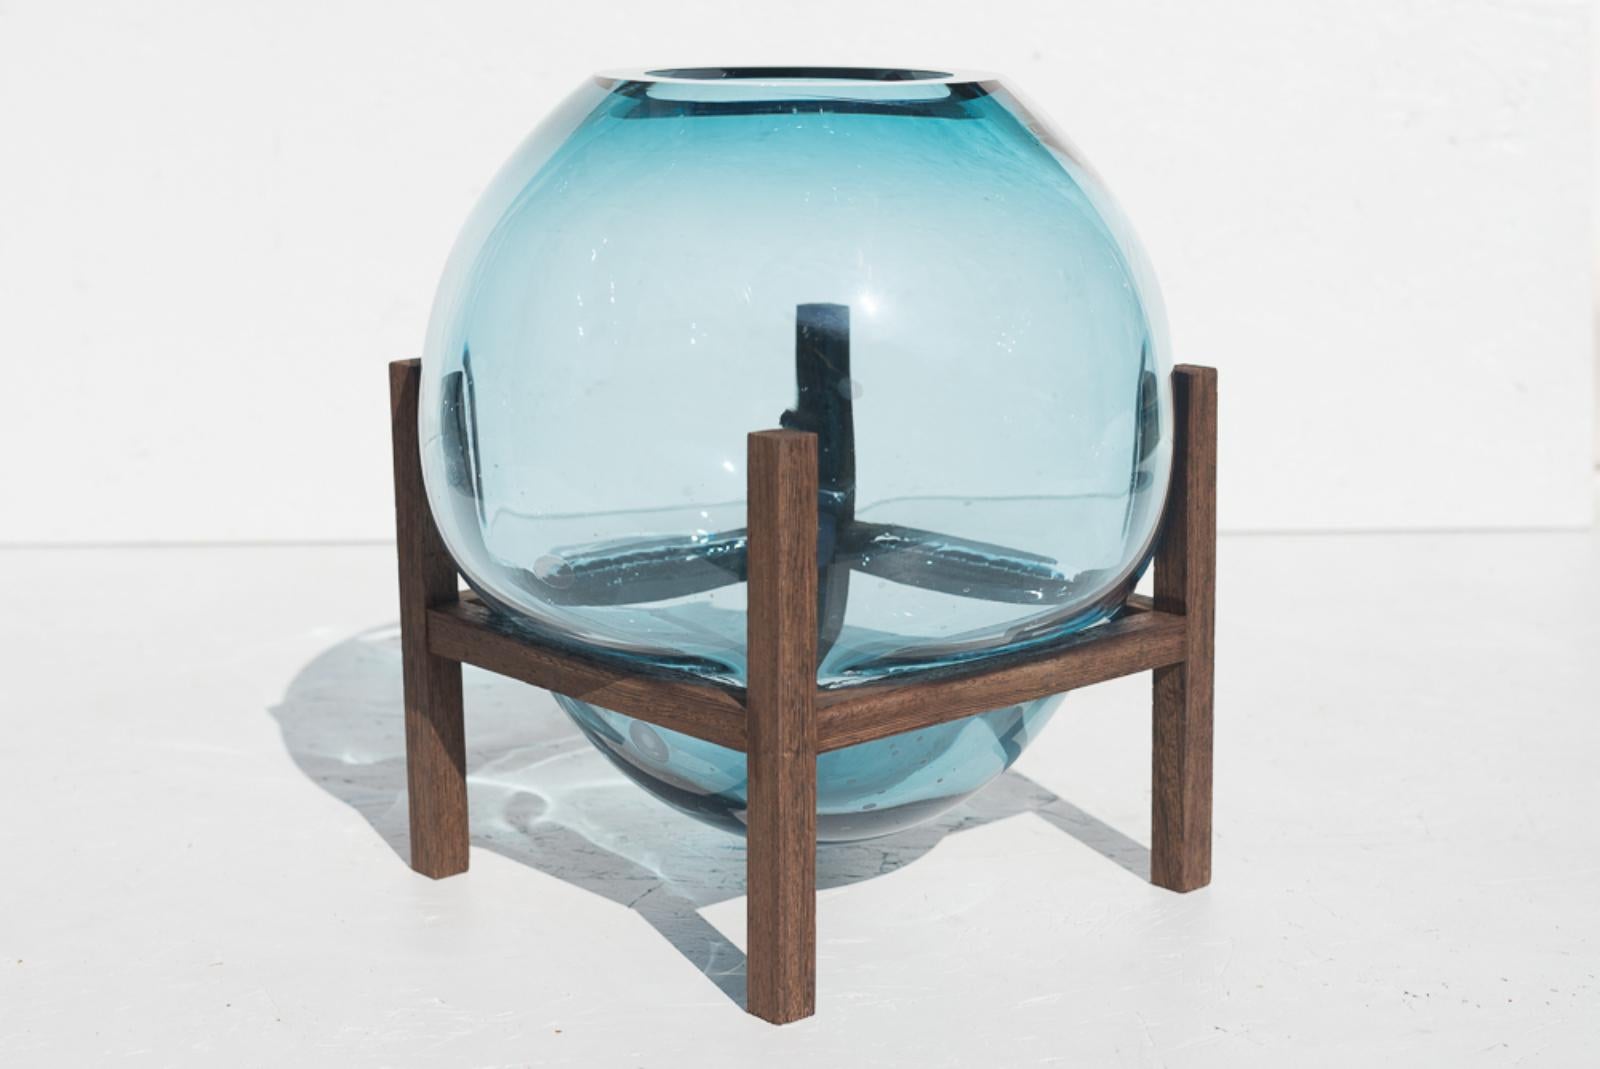 Set of 2 round square blue up & down vase by Studio Thier & van Daalen
Dimensions: W 30 x D 30 x H 35cm
Materials: Wood, glass

When blowing soap bubbles in the air Iris & Ruben had the dream to capture these temporary beauties in a tendril